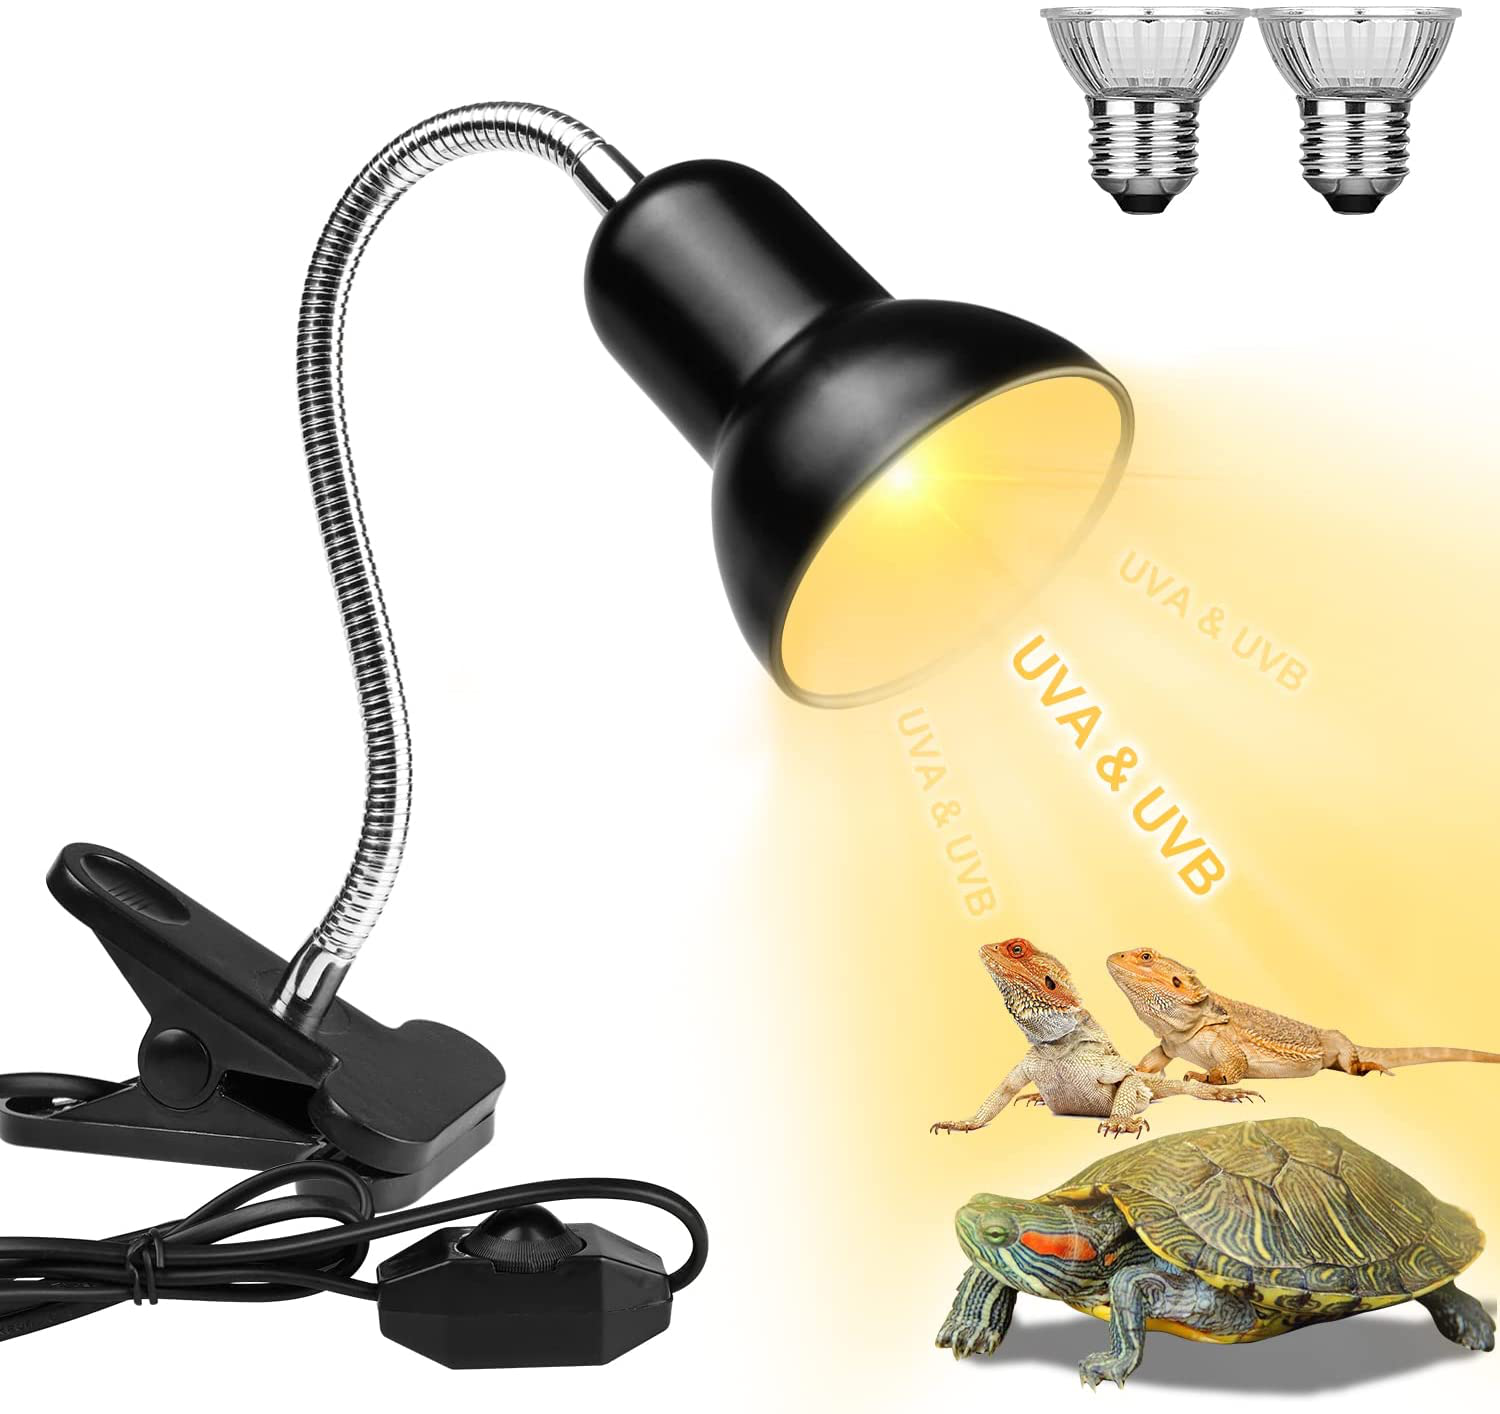 Black 25W/50W/E27 UVA UVB Bulbs Basking Spot Lamp JLXMROSE Heat and Light for Reptiles and Amphibian Tanks with Bulbs & Switch Pet Heating Lamp Adjustable and Rotates 360° 